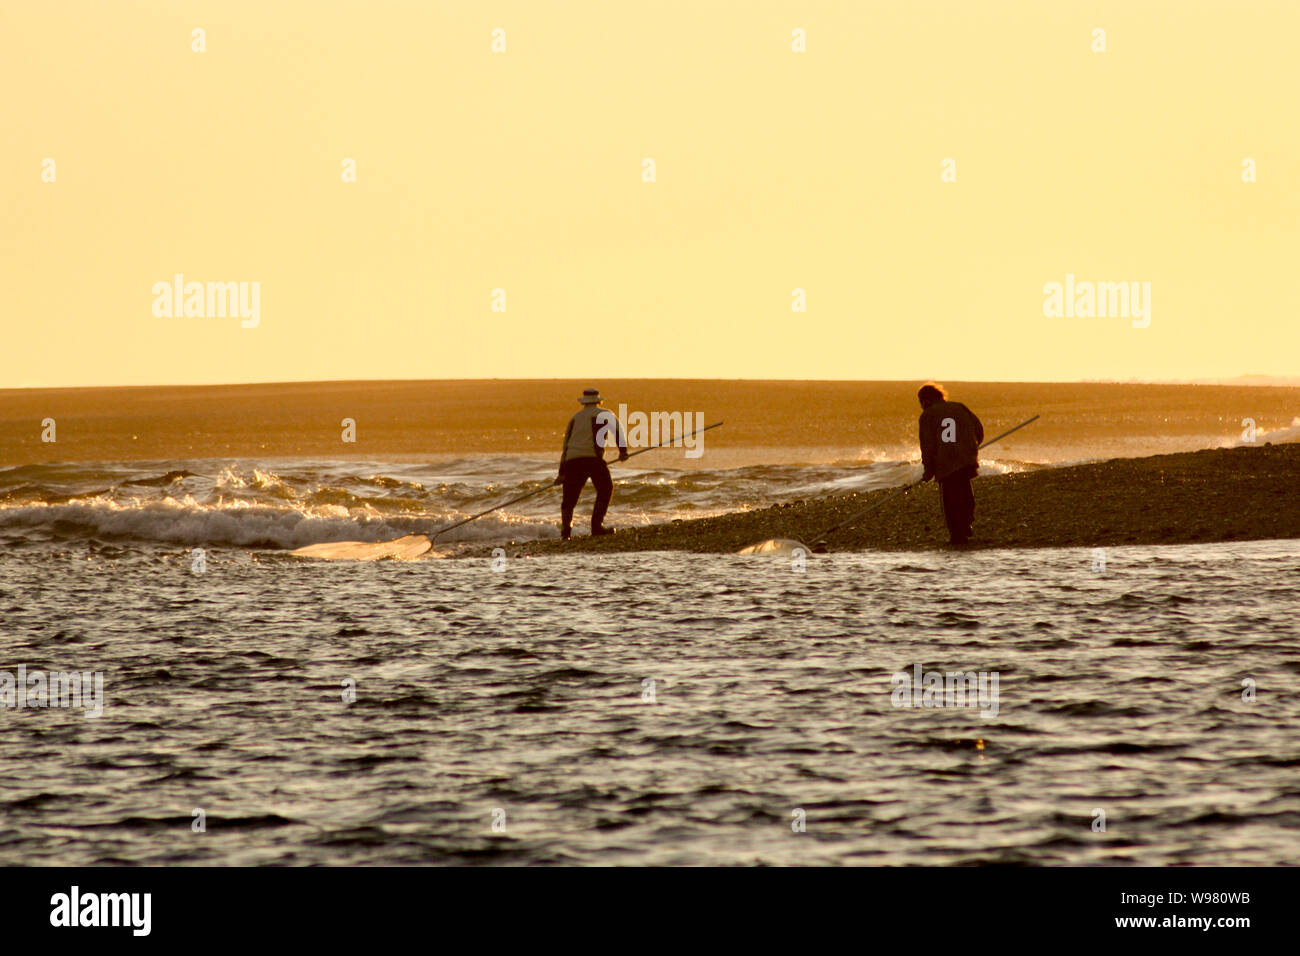 Whitebaiters fish on the rising tide at the Hokitika River mouth at sunset in New Zealand Stock Photo